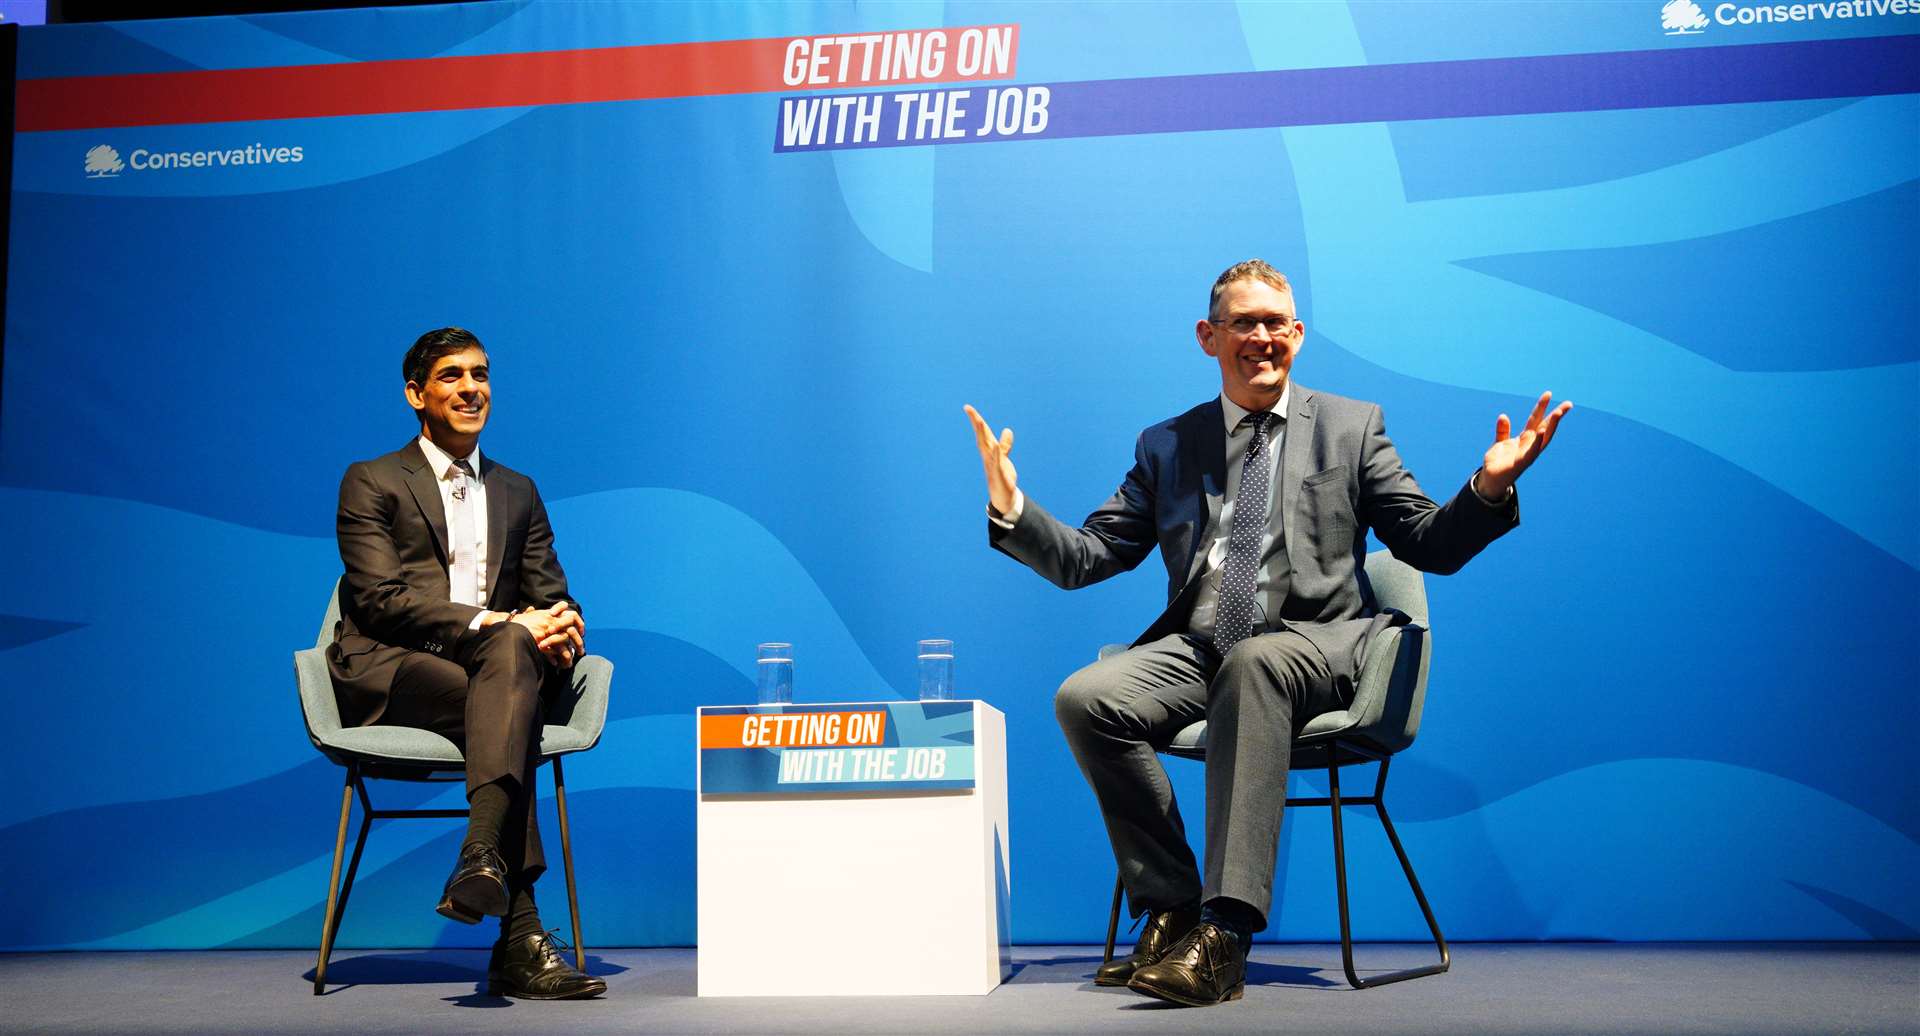 Paul Maynard, right, appeared on stage with then-chancellor Rishi Sunak (Peter Byrne/PA)